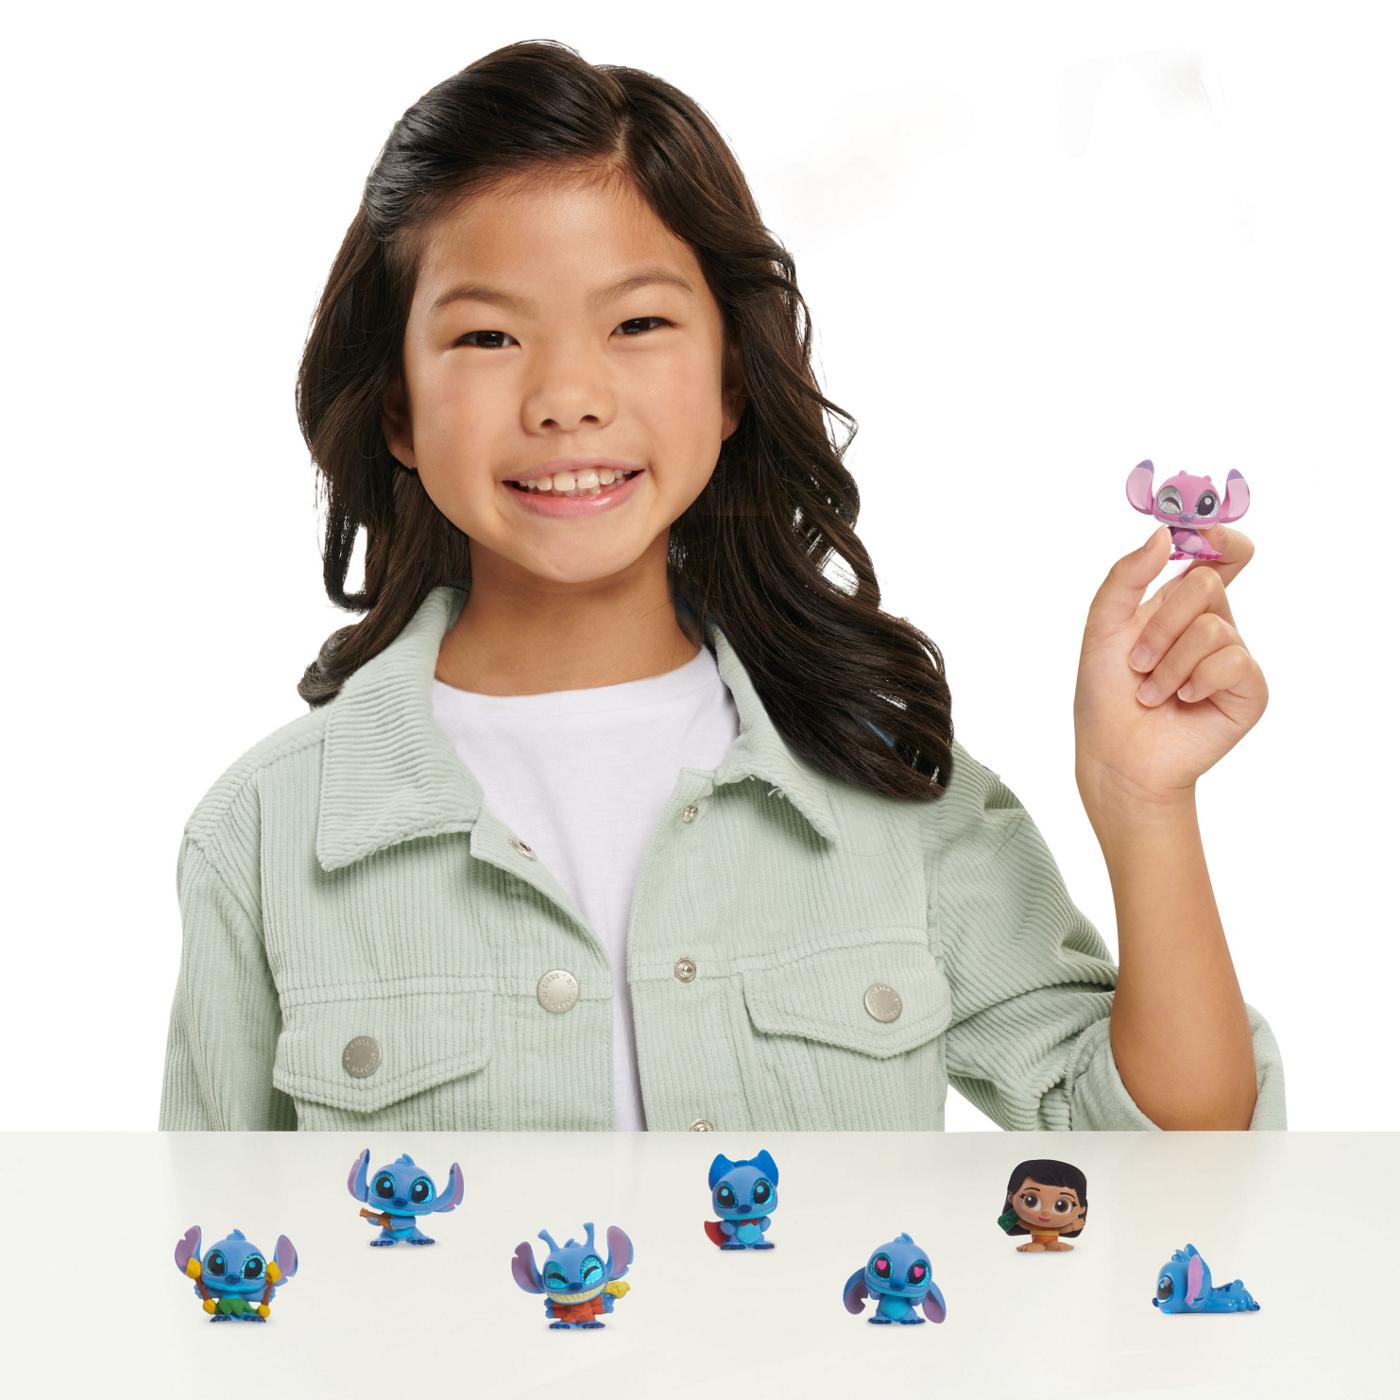 Just Play Disney Doorables Stitch Collection Peek - Shop Action